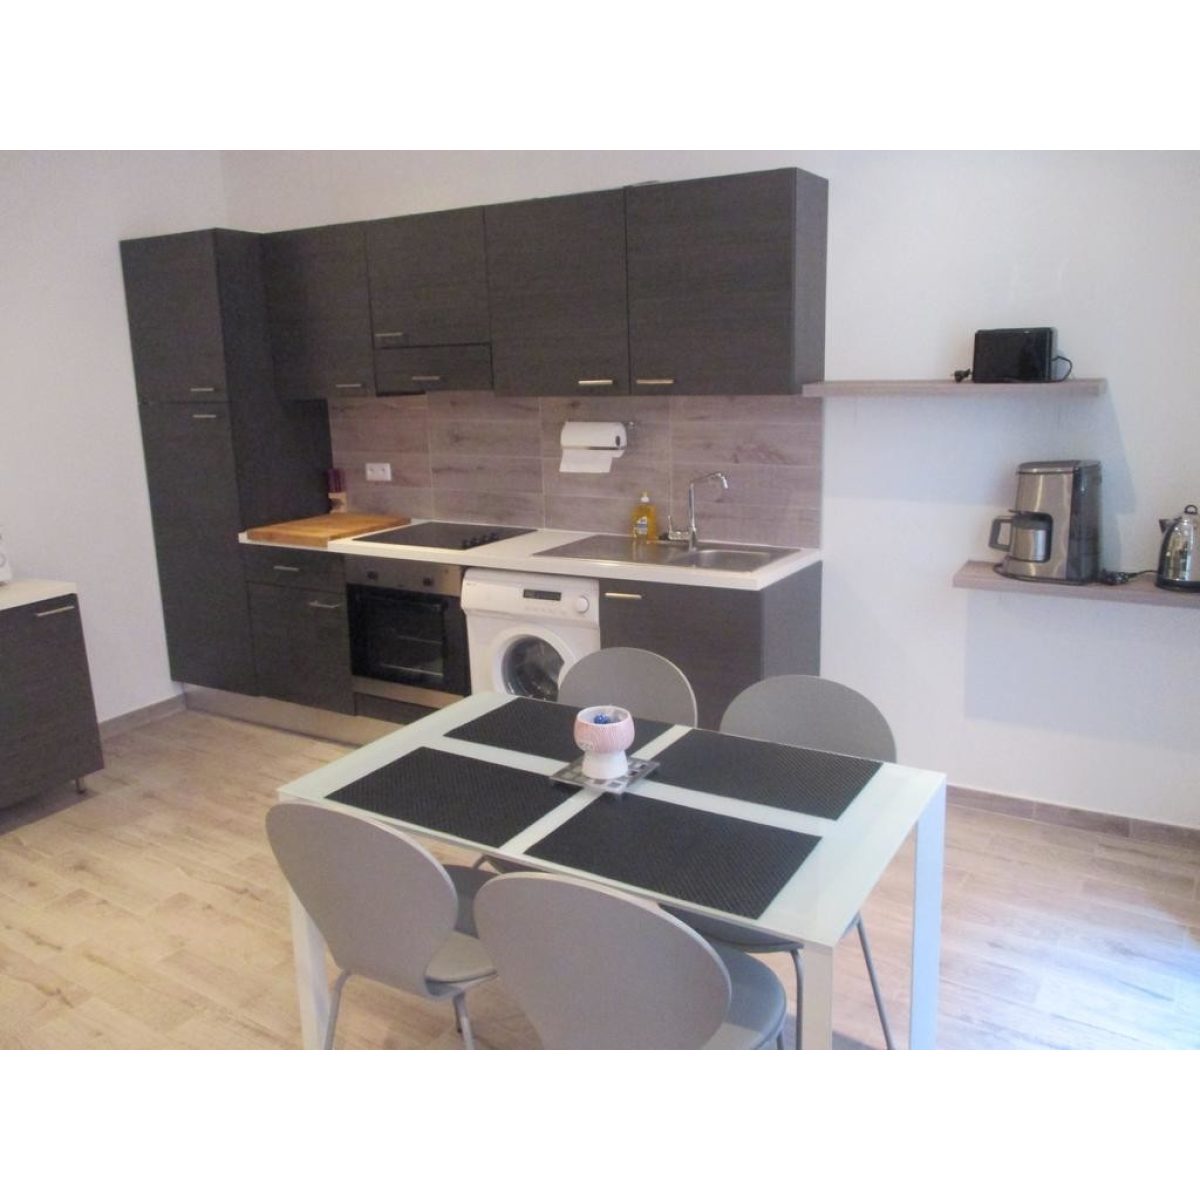 Dazzling 2 bedroom apartment in Zagreb for rent (Students only) | Zagreb apartment for rent 22